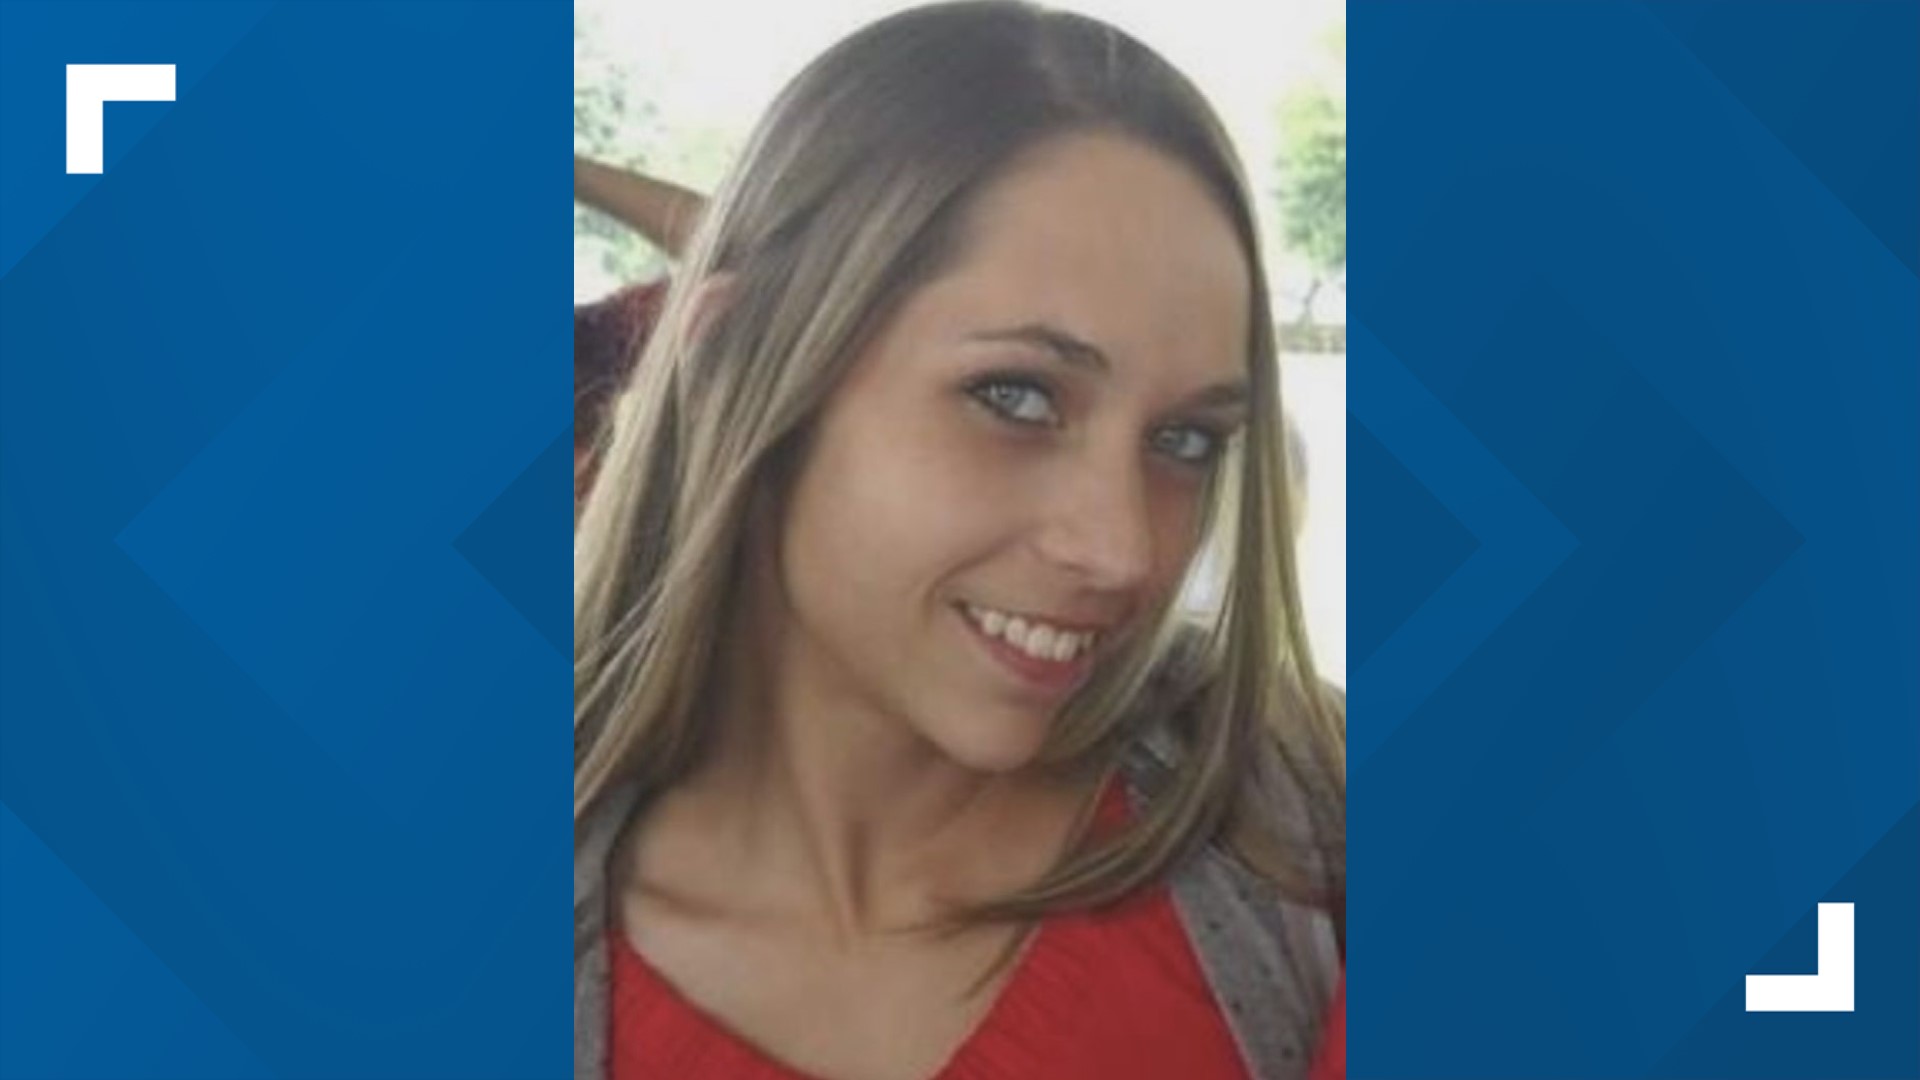 Jessica Masker was last seen April 15, 2013, on the southeast side of Indianapolis near East Washington and Dequincy streets.